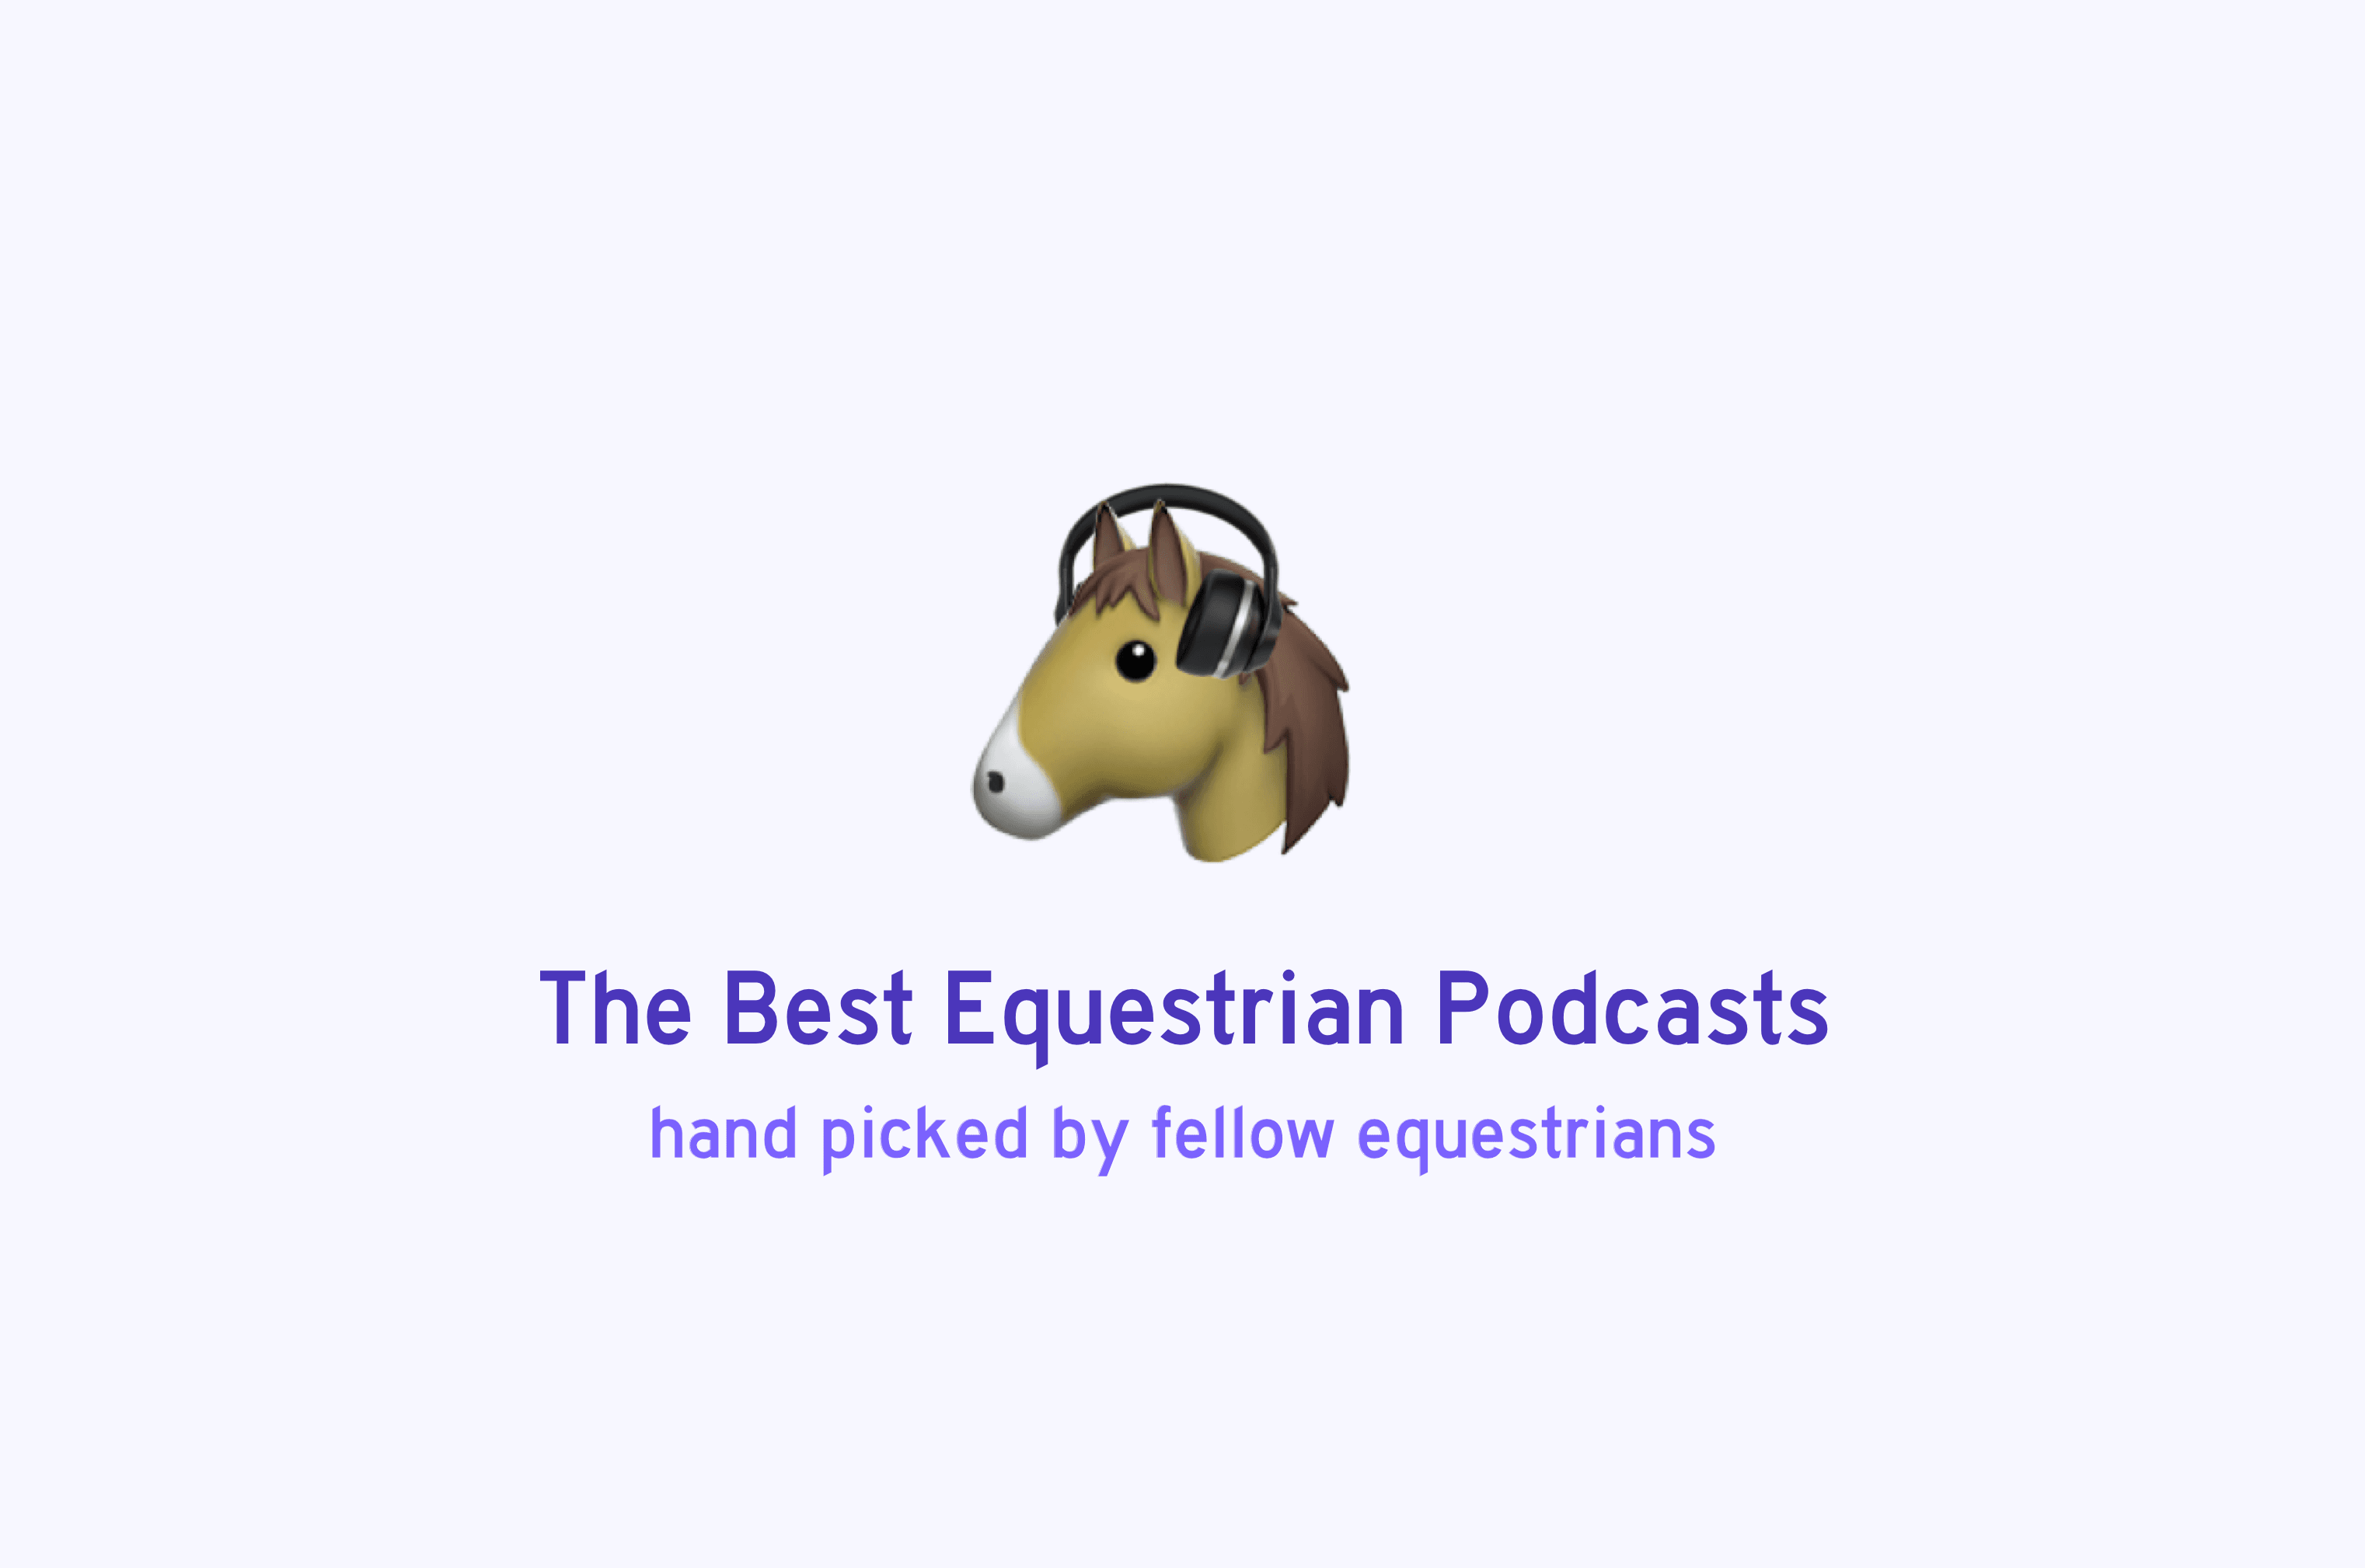 The Best Equestrian Podcasts of 2019 | Equipad